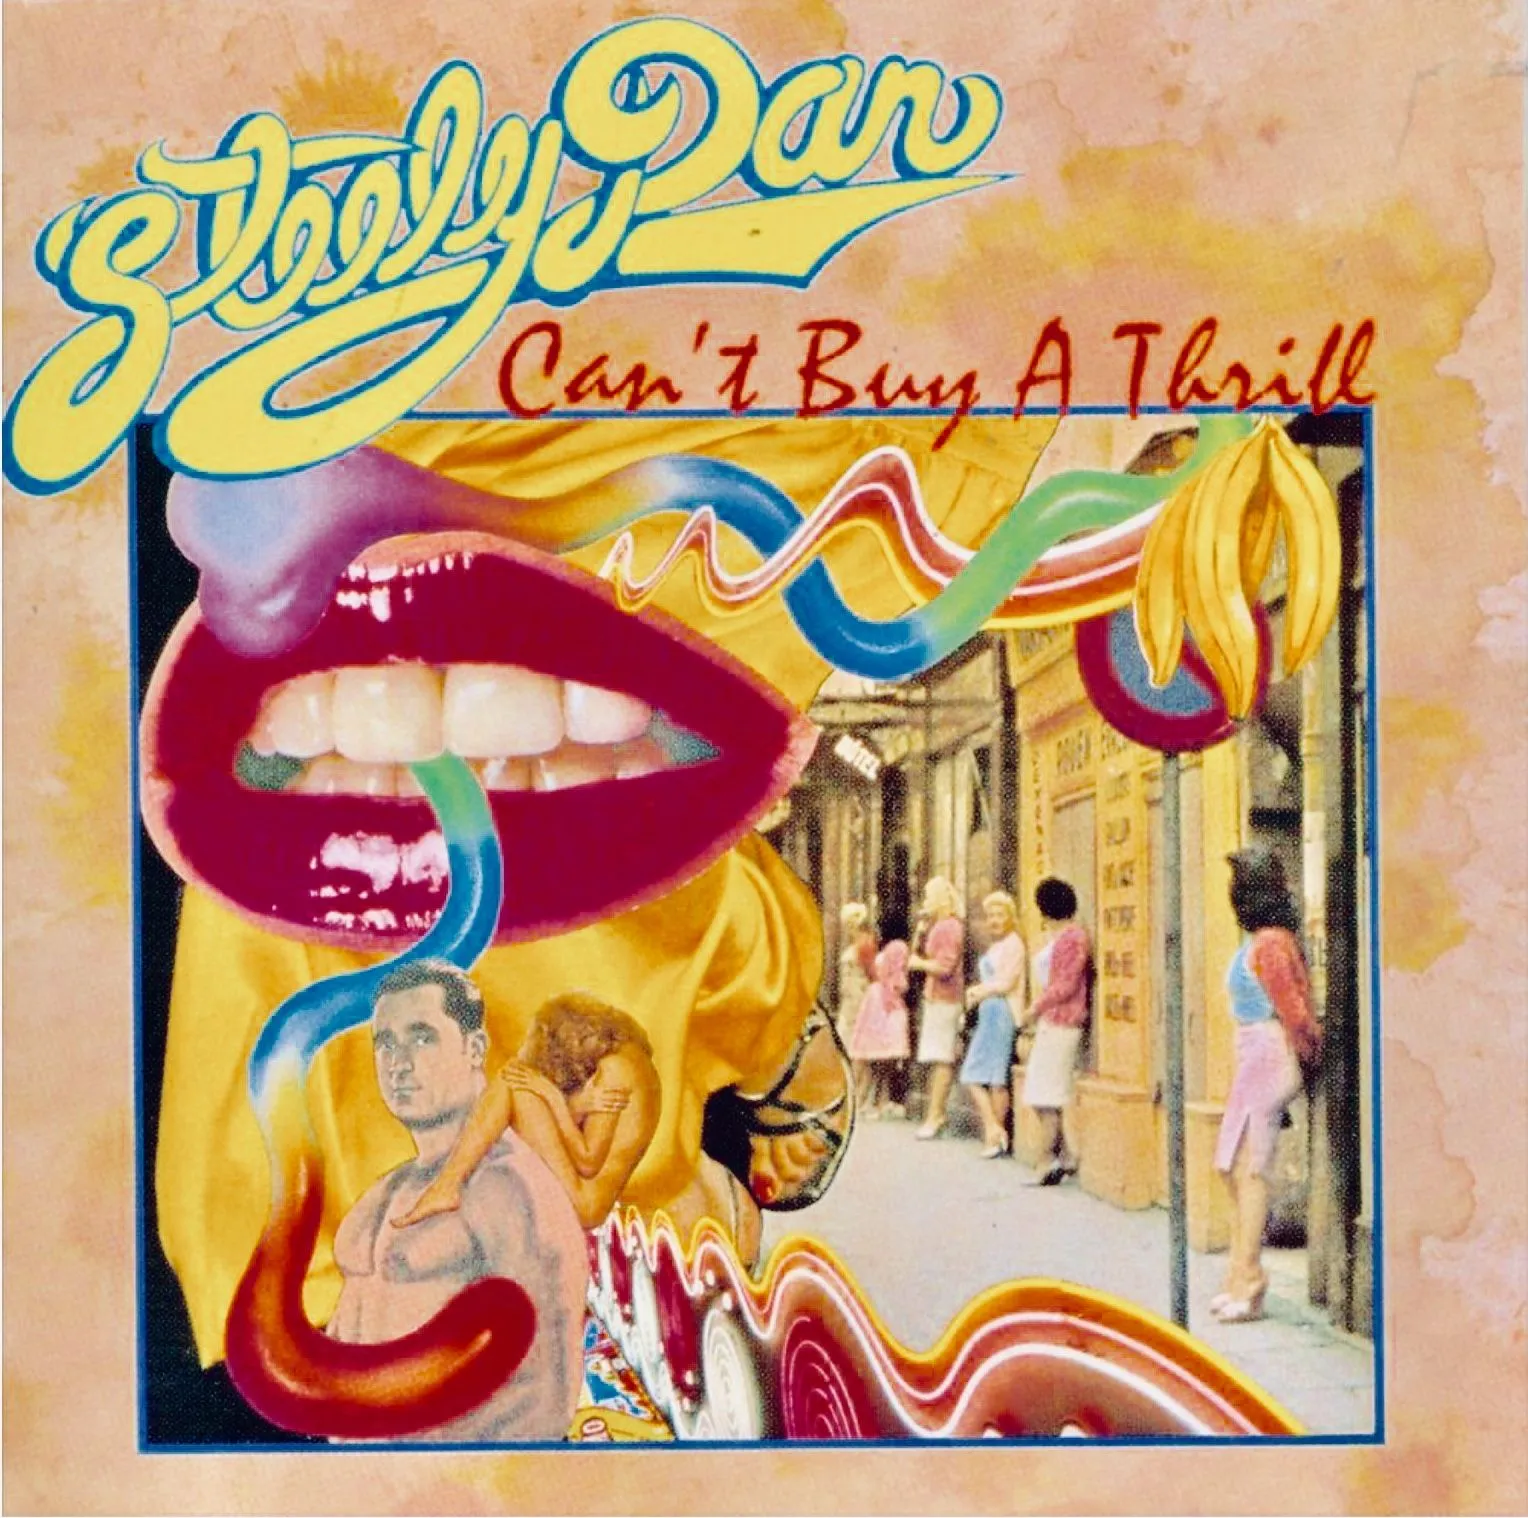 Steely Dan - Can’t Buy a Thrill (1972)